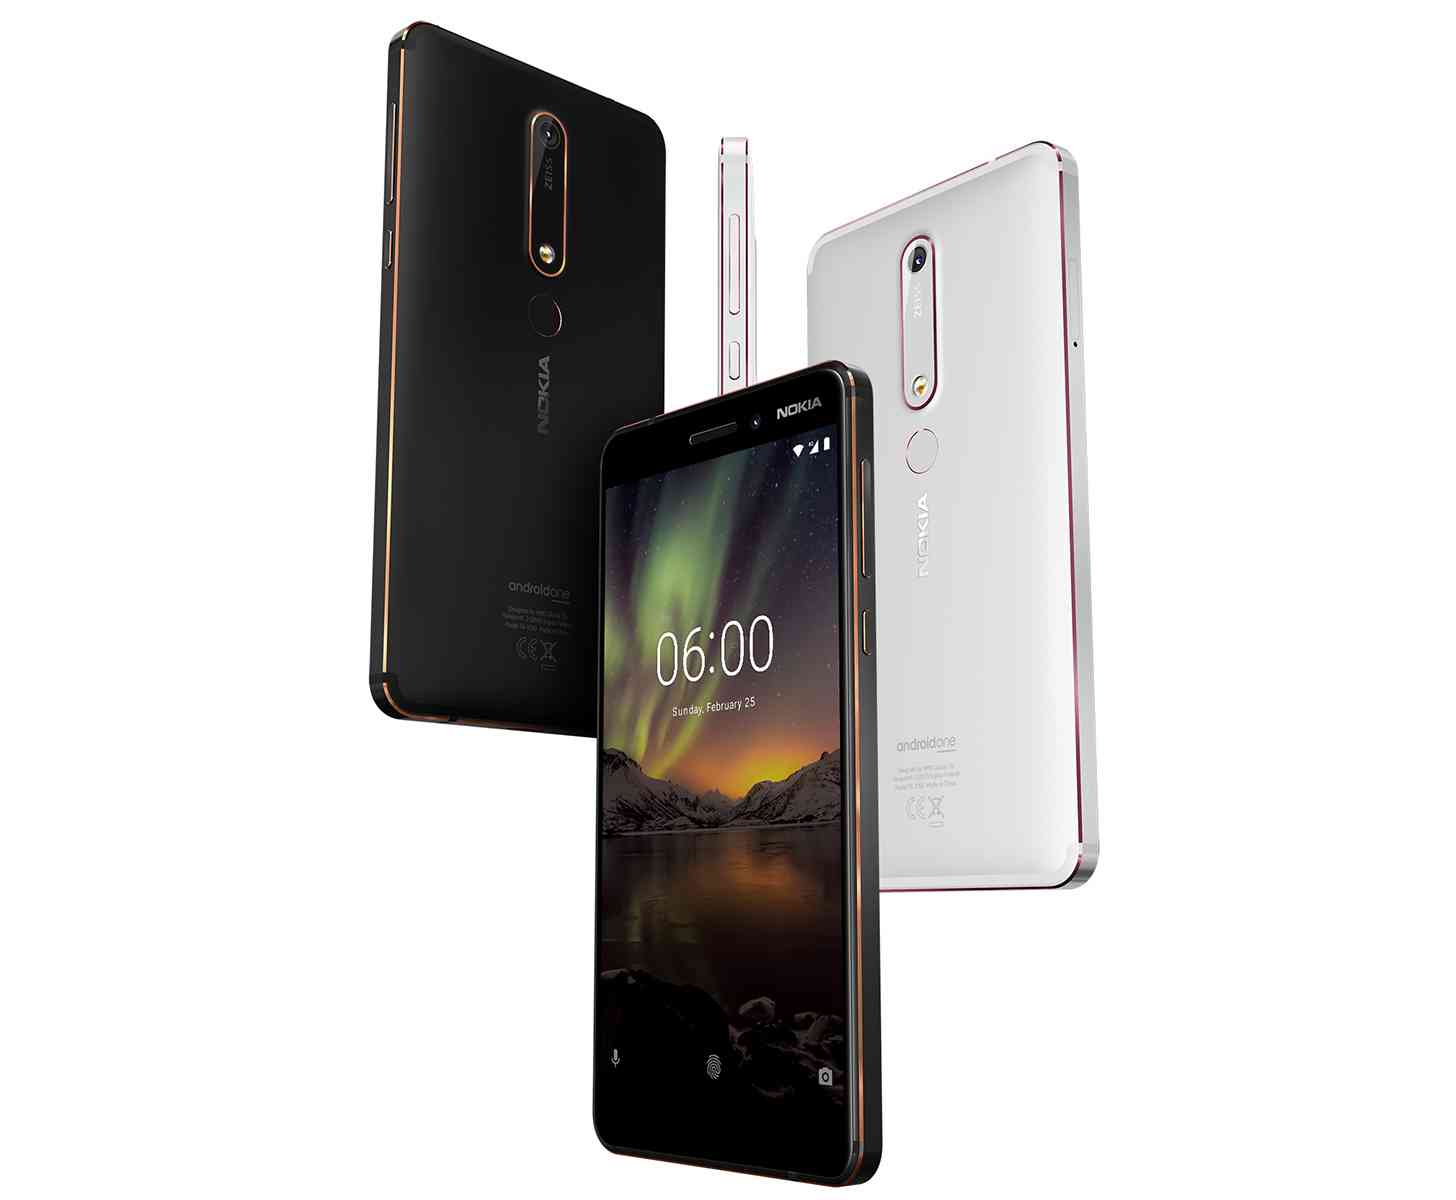 New Nokia 6 official images